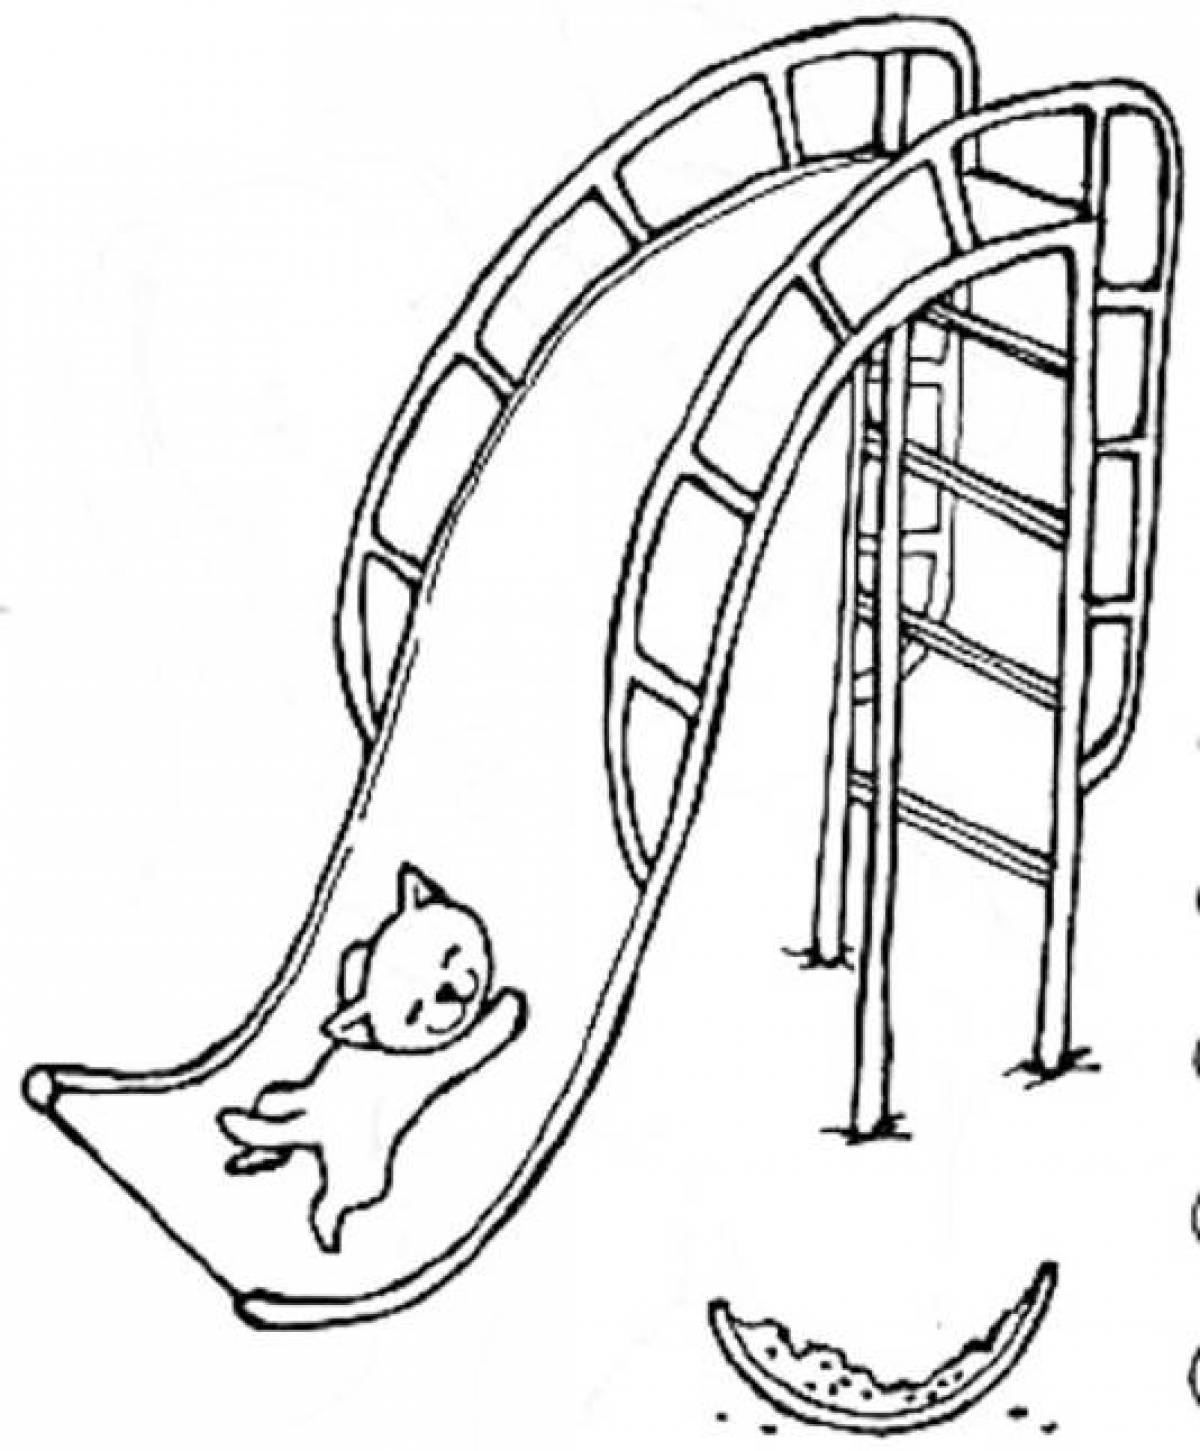 Amazing Slide Eater Coloring Page